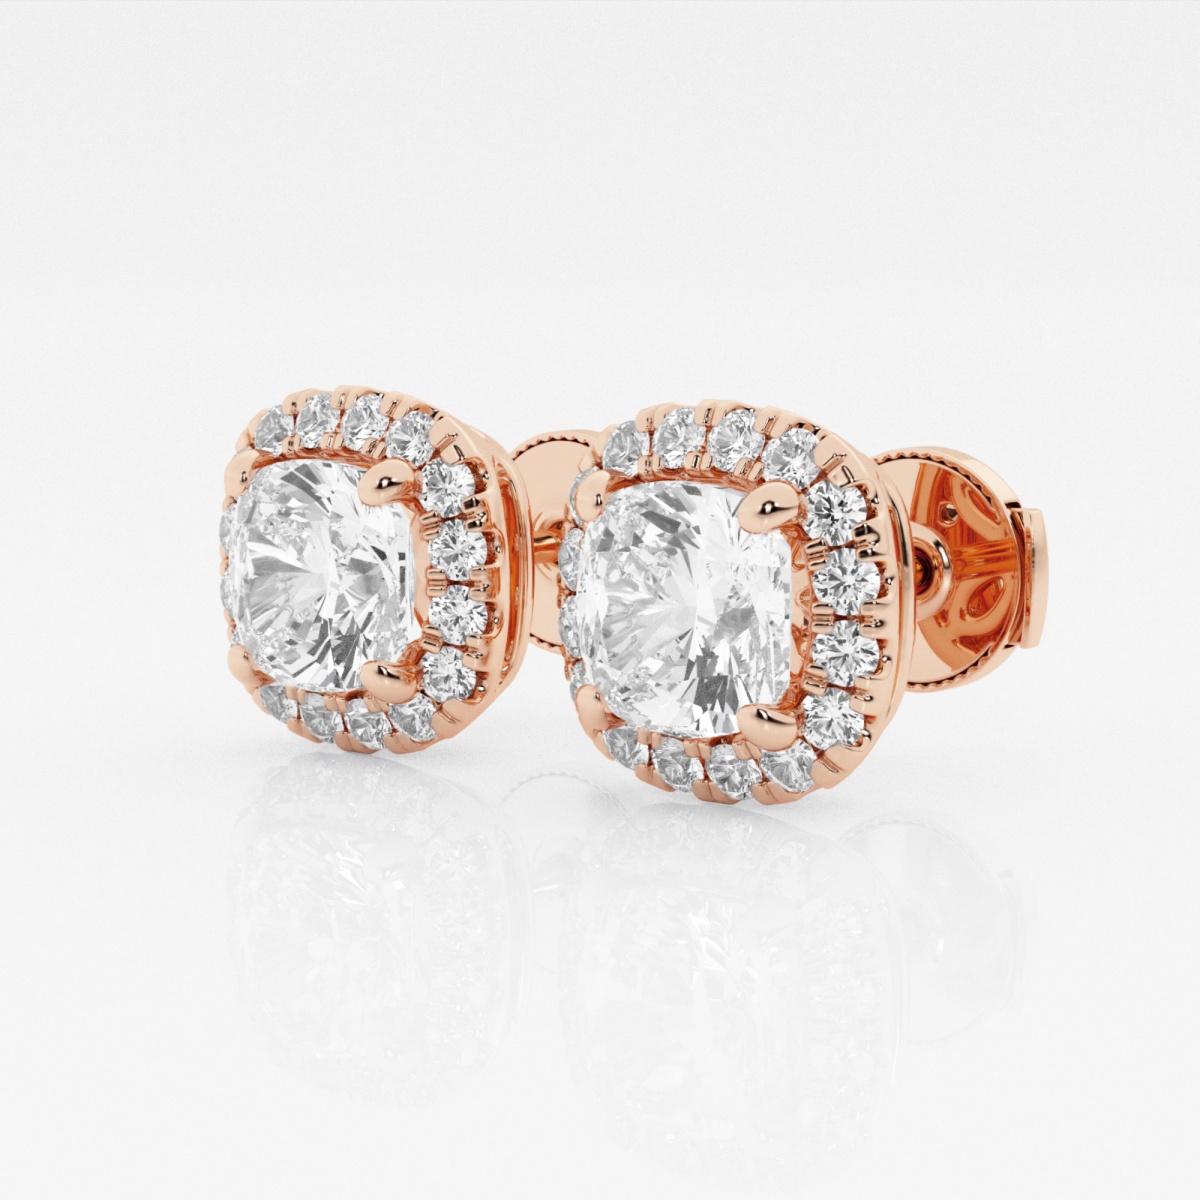 Additional Image 1 for  3 1/2 ctw Cushion Lab Grown Diamond Halo Certified Stud Earrings